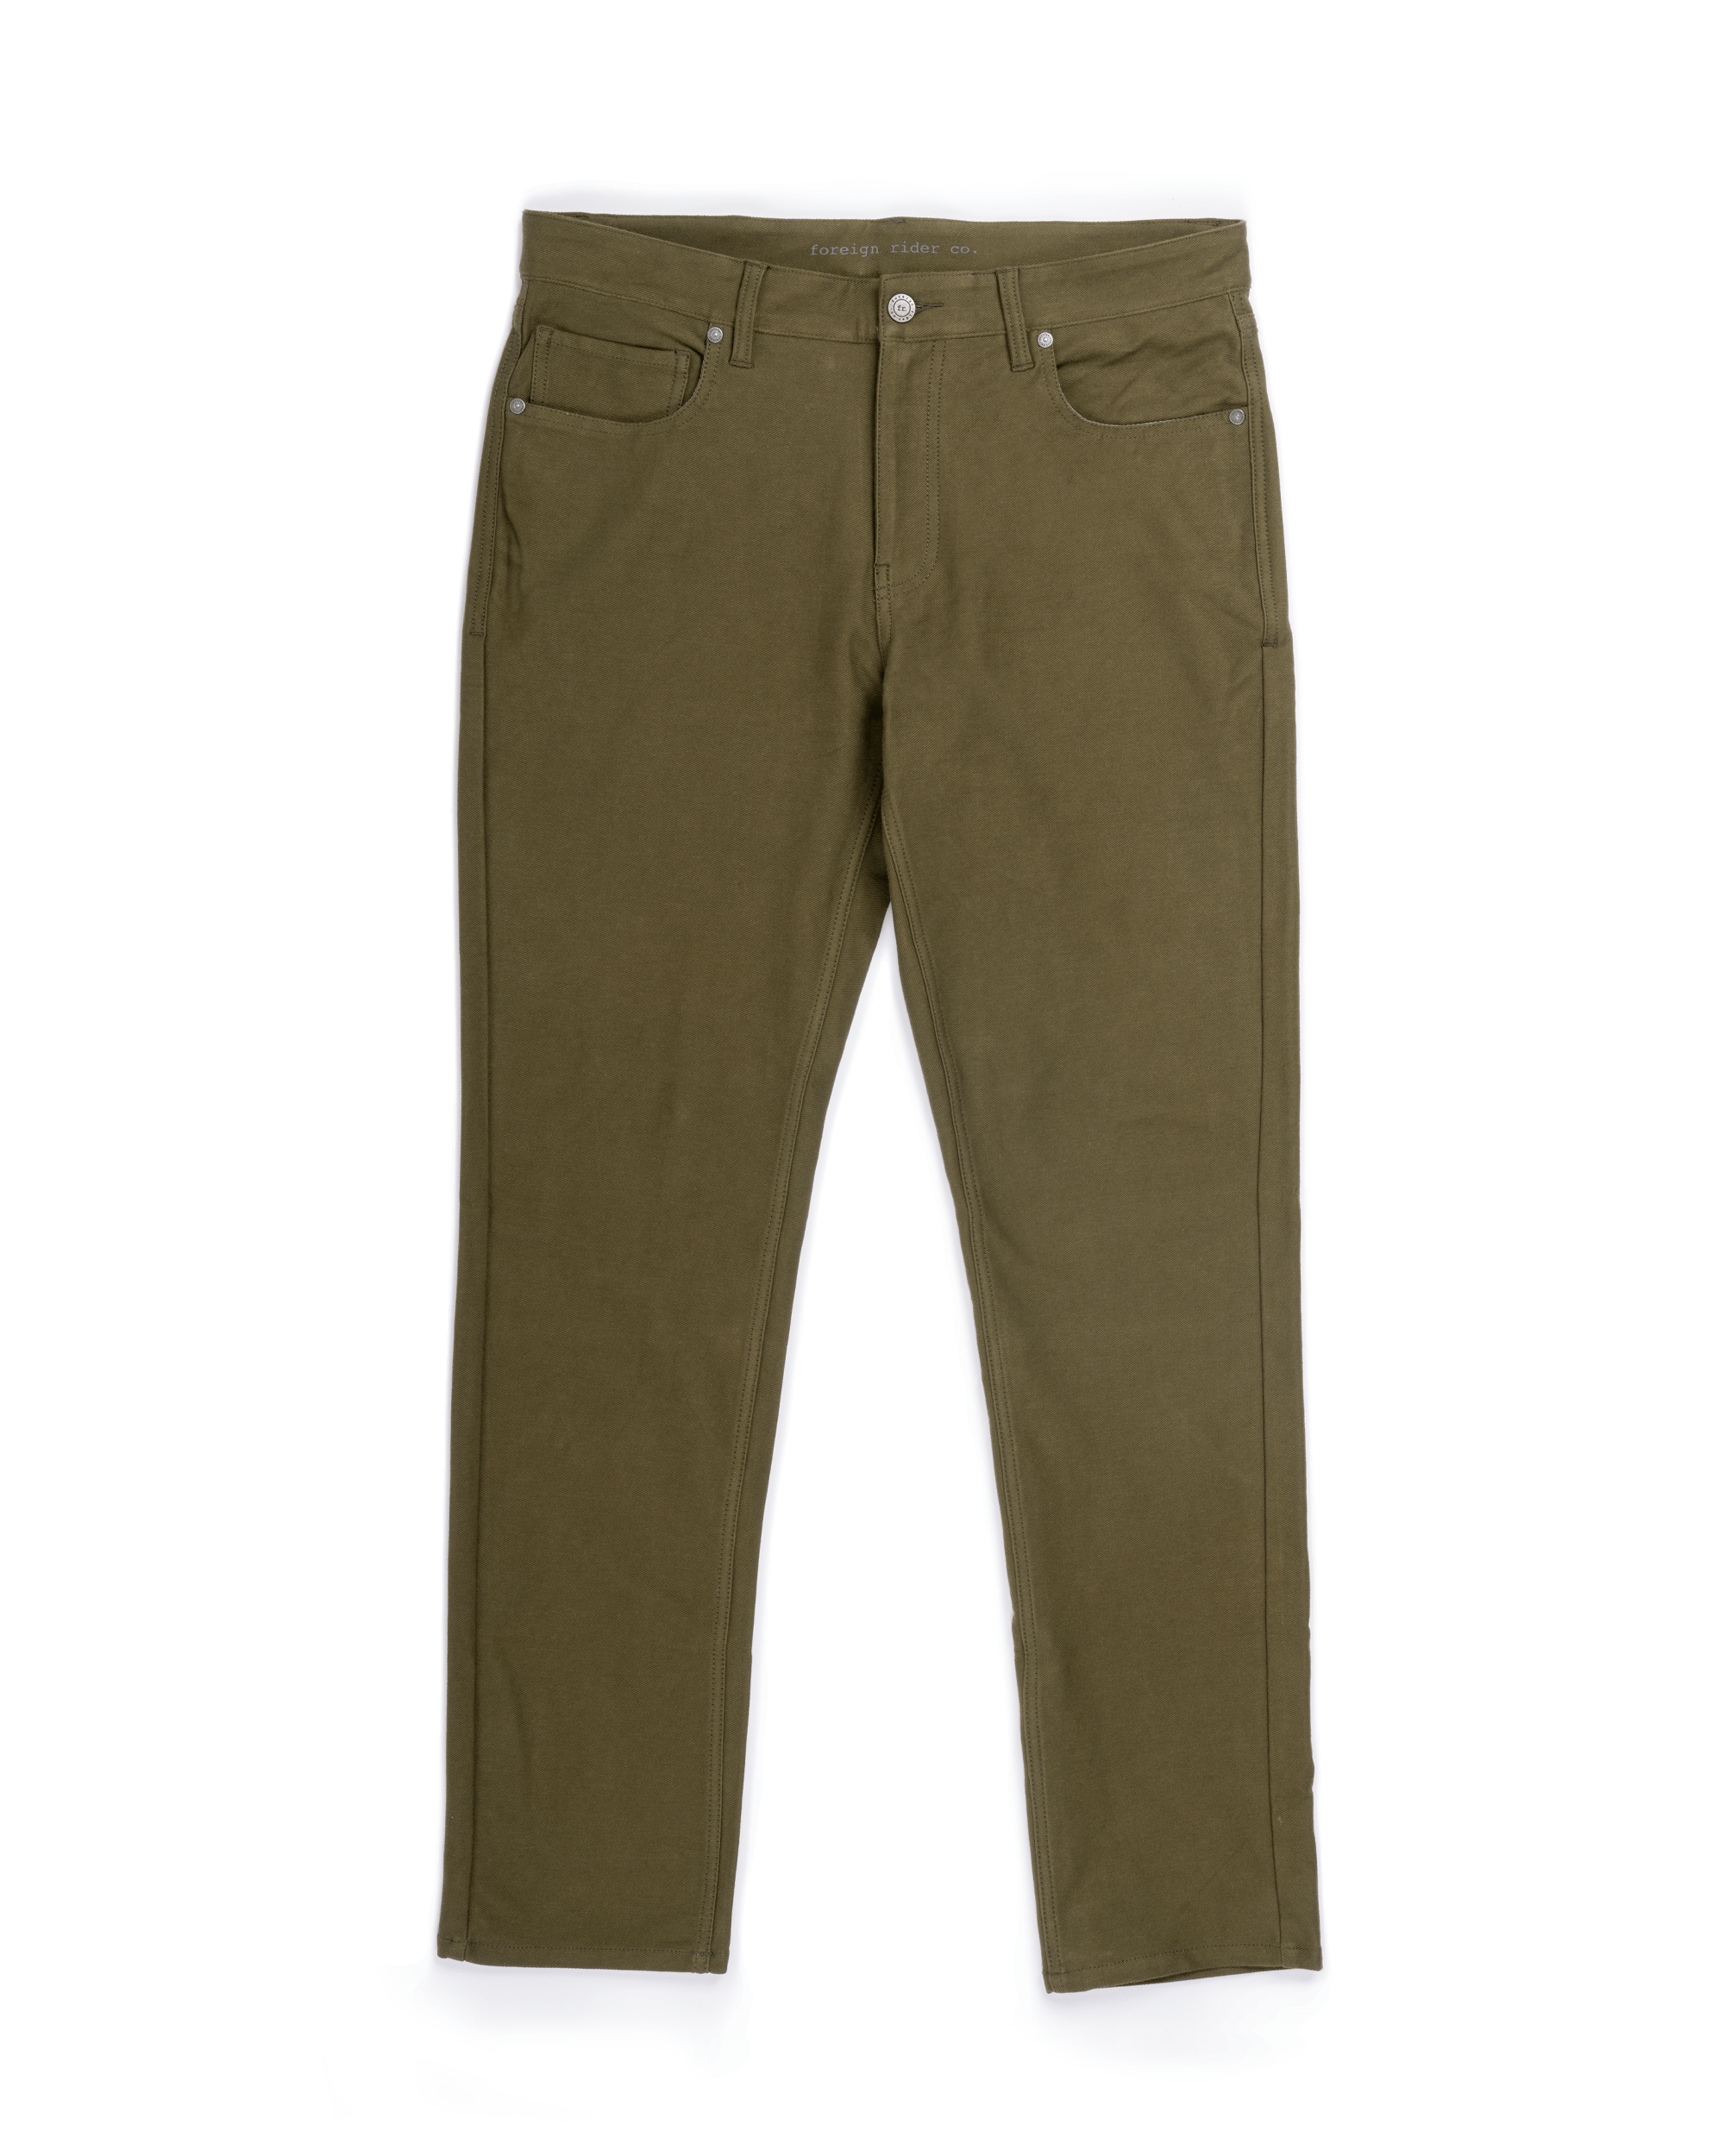 https://www.foreignrider.com/cdn/shop/files/Foreign-Rider-Co-5-Pocket-Organic-Cotton-Pant-Olive-Flatlay_349a57ea-97ae-42c8-a8cb-5a8693b448a1.png?v=1702677977&width=2000